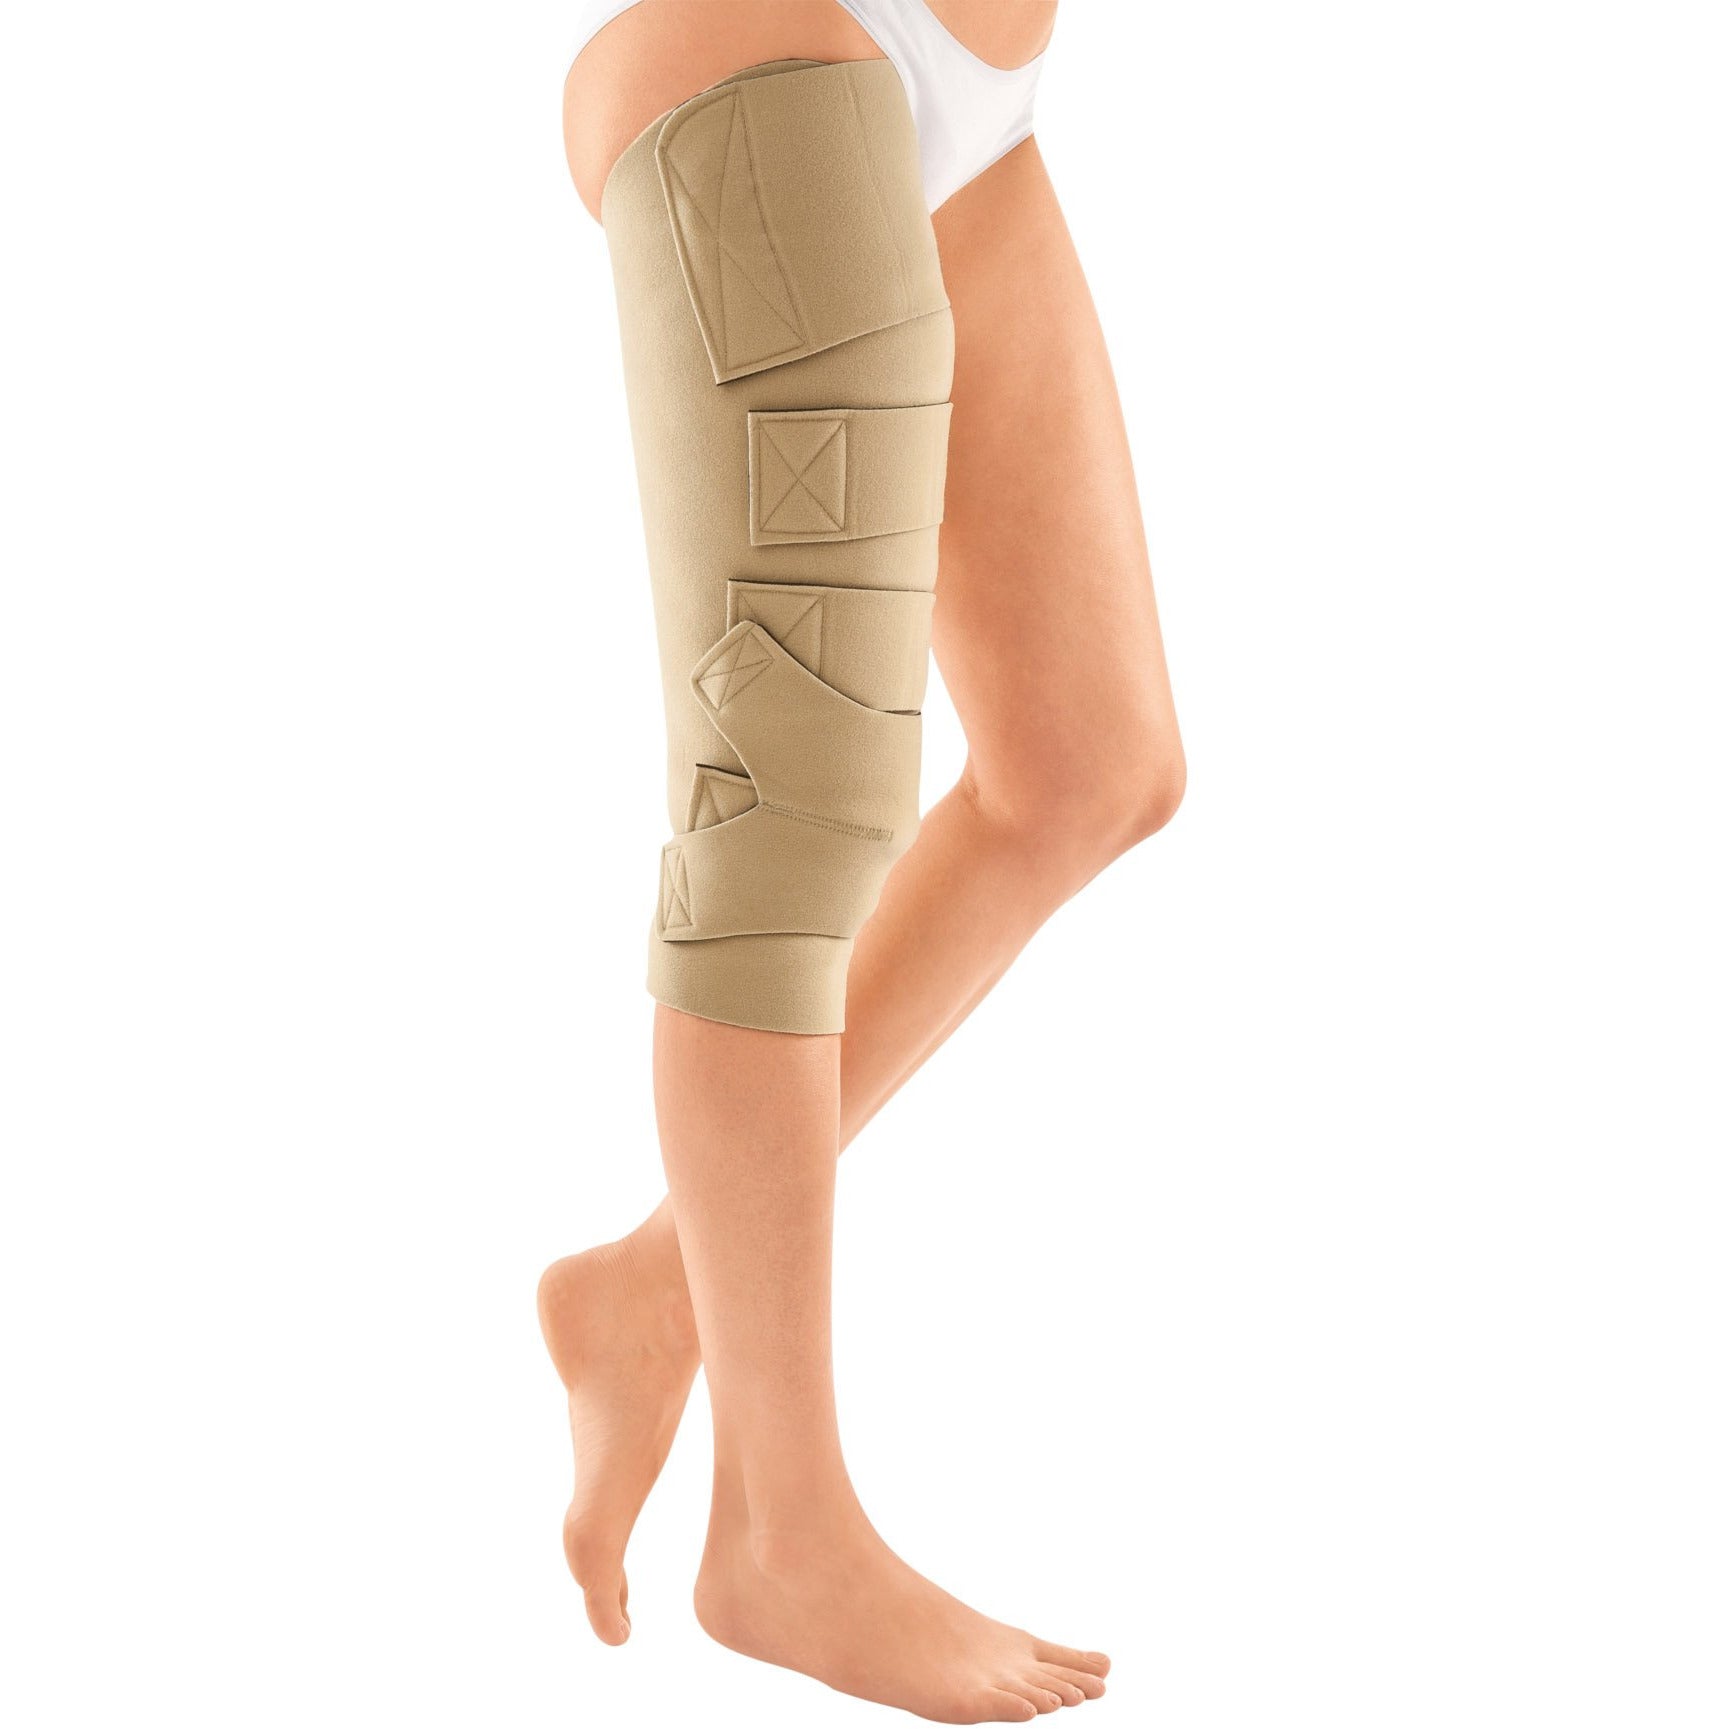  ABSOLUTE SUPPORT Plus Size Footless Compression